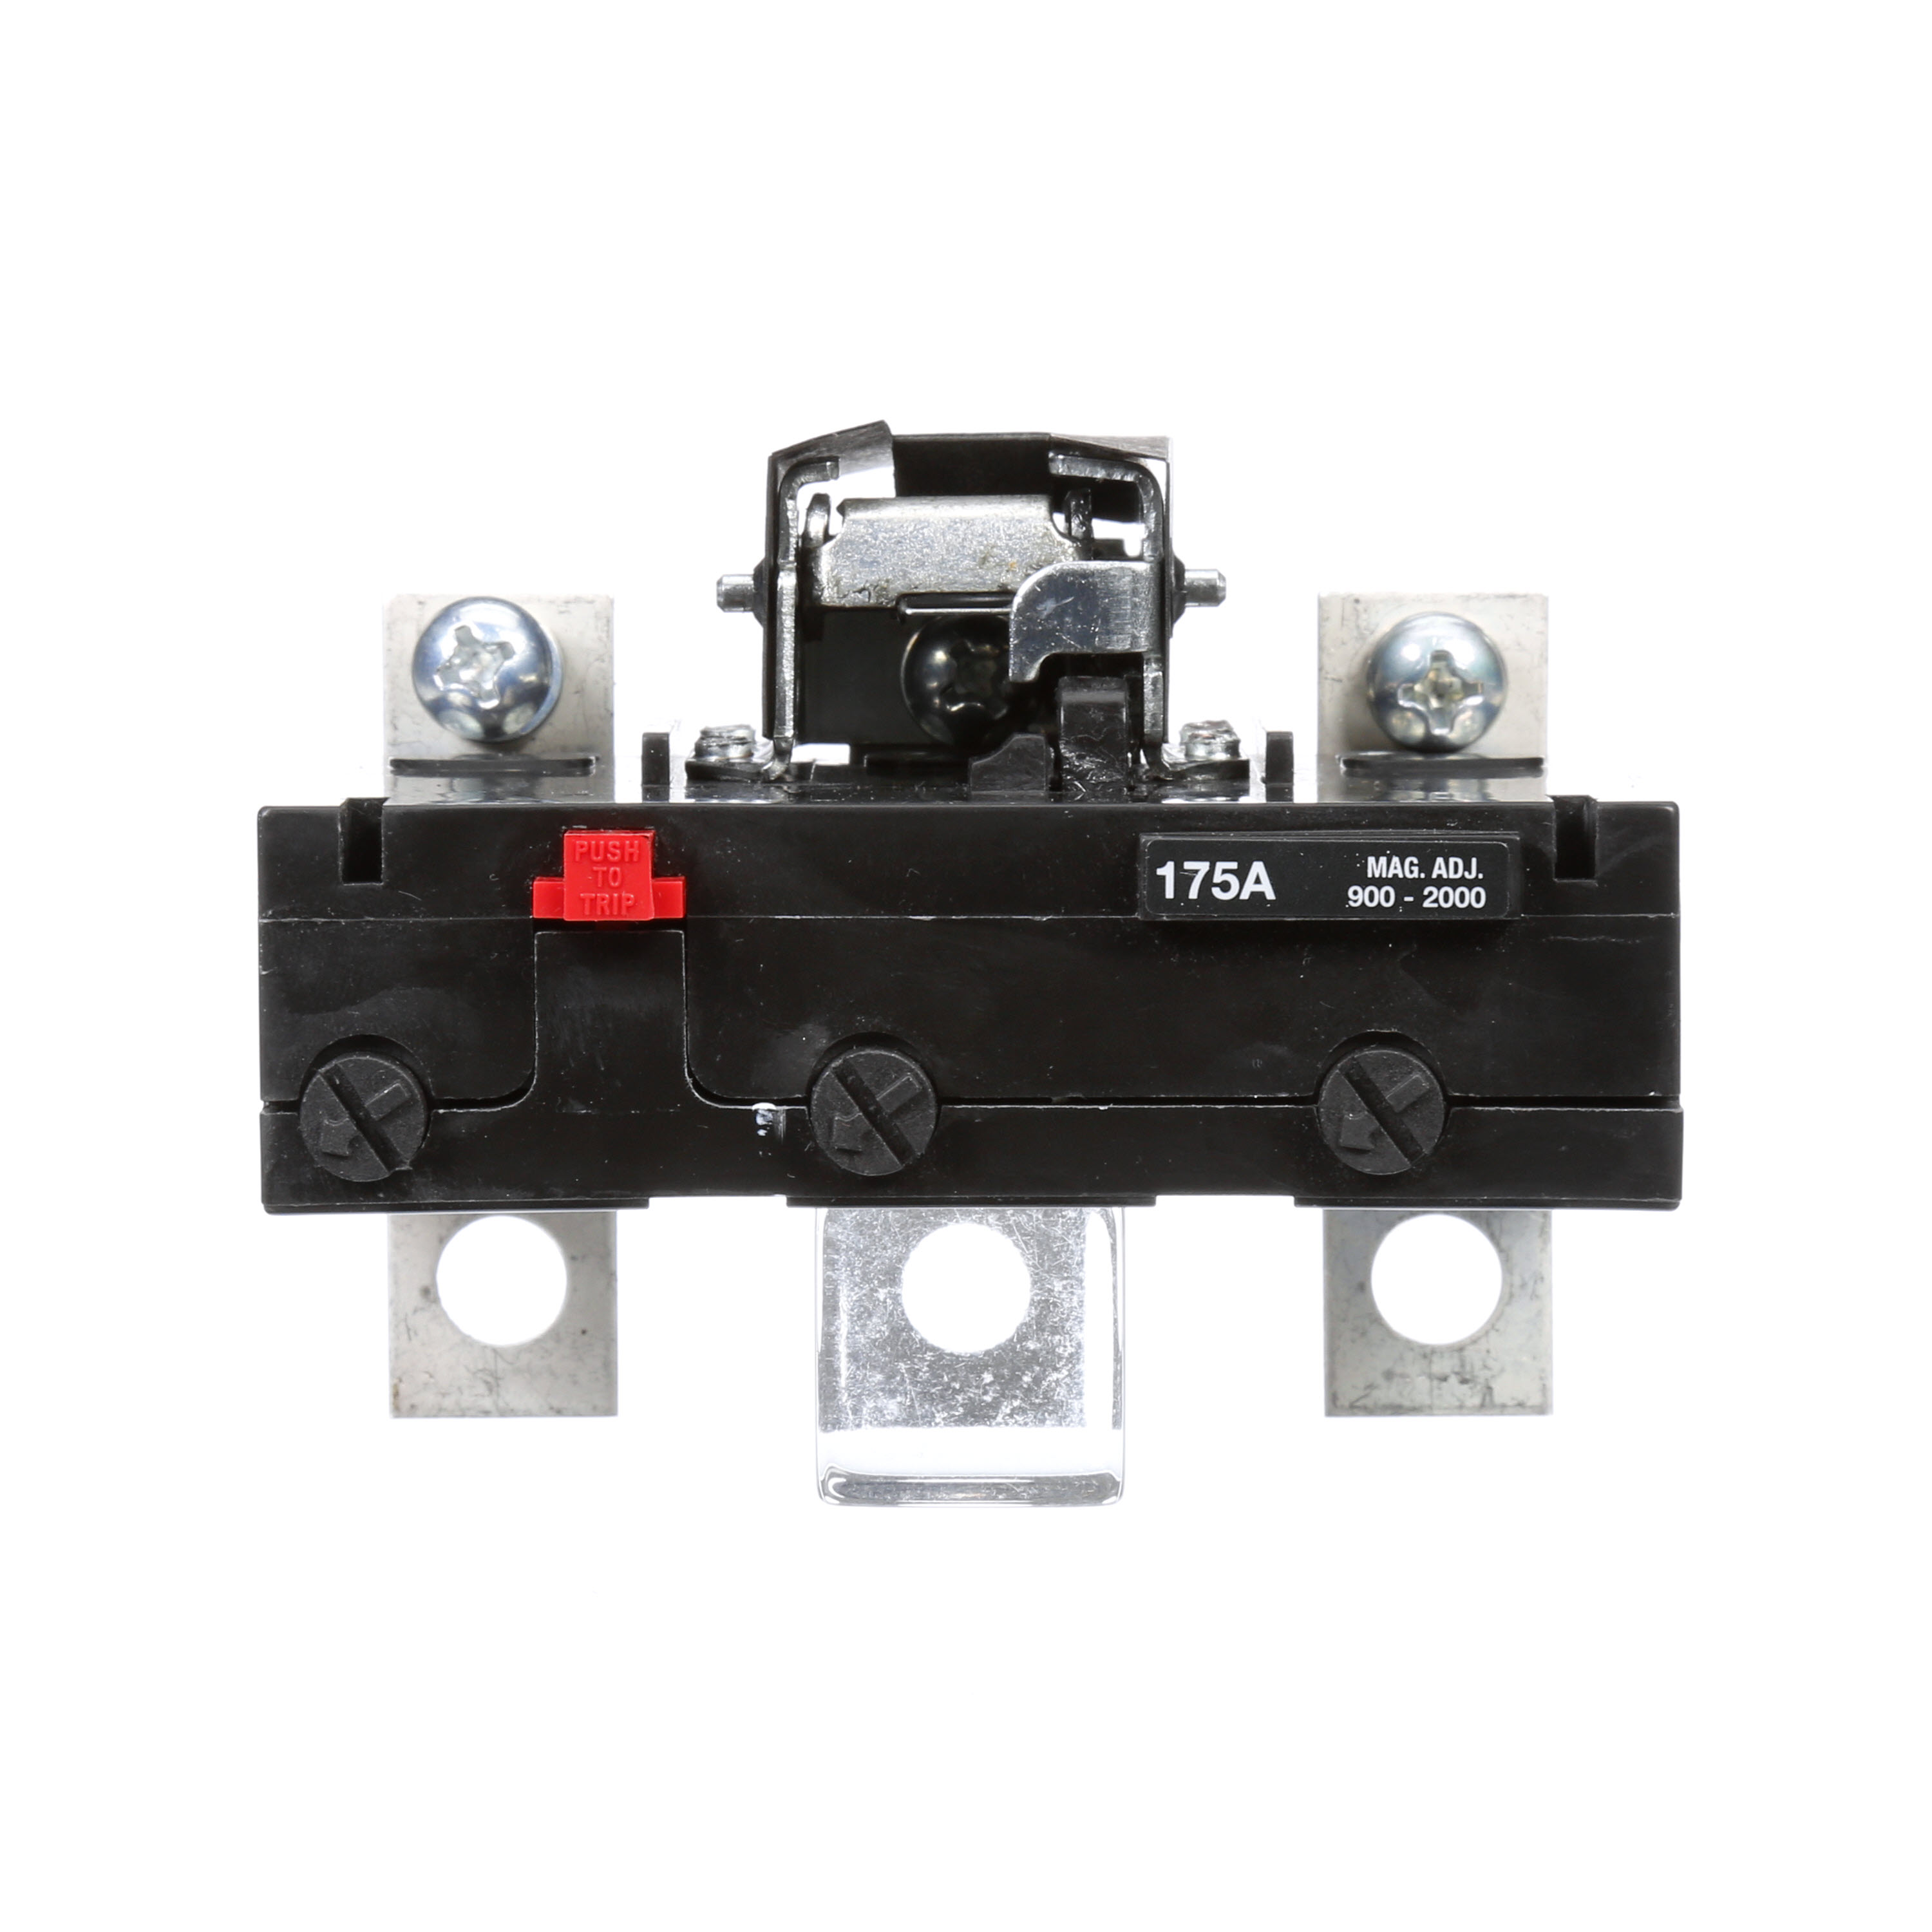 SIEMENS LOW VOLTAGE SENTRON MOLDED CASE CIRCUIT BREAKER. THERMAL - MAGNETIC TRIP UNIT FOR FD FRAME 175A 3-POLE 600V BREAKERS.